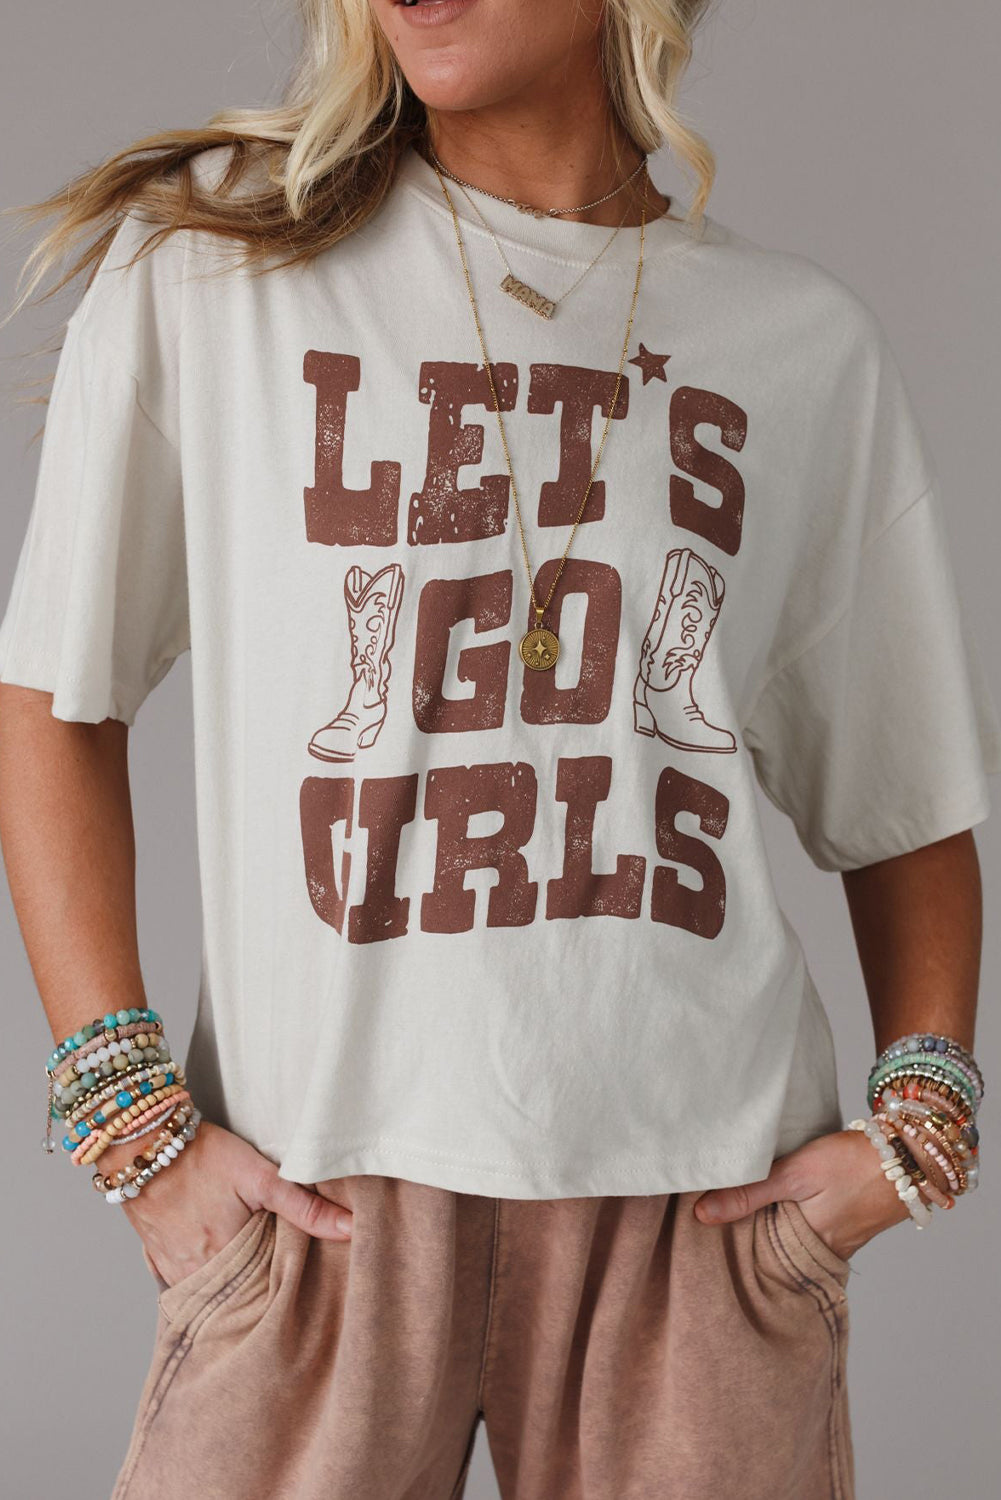 LETS GO GIRLS Western Boots Tee